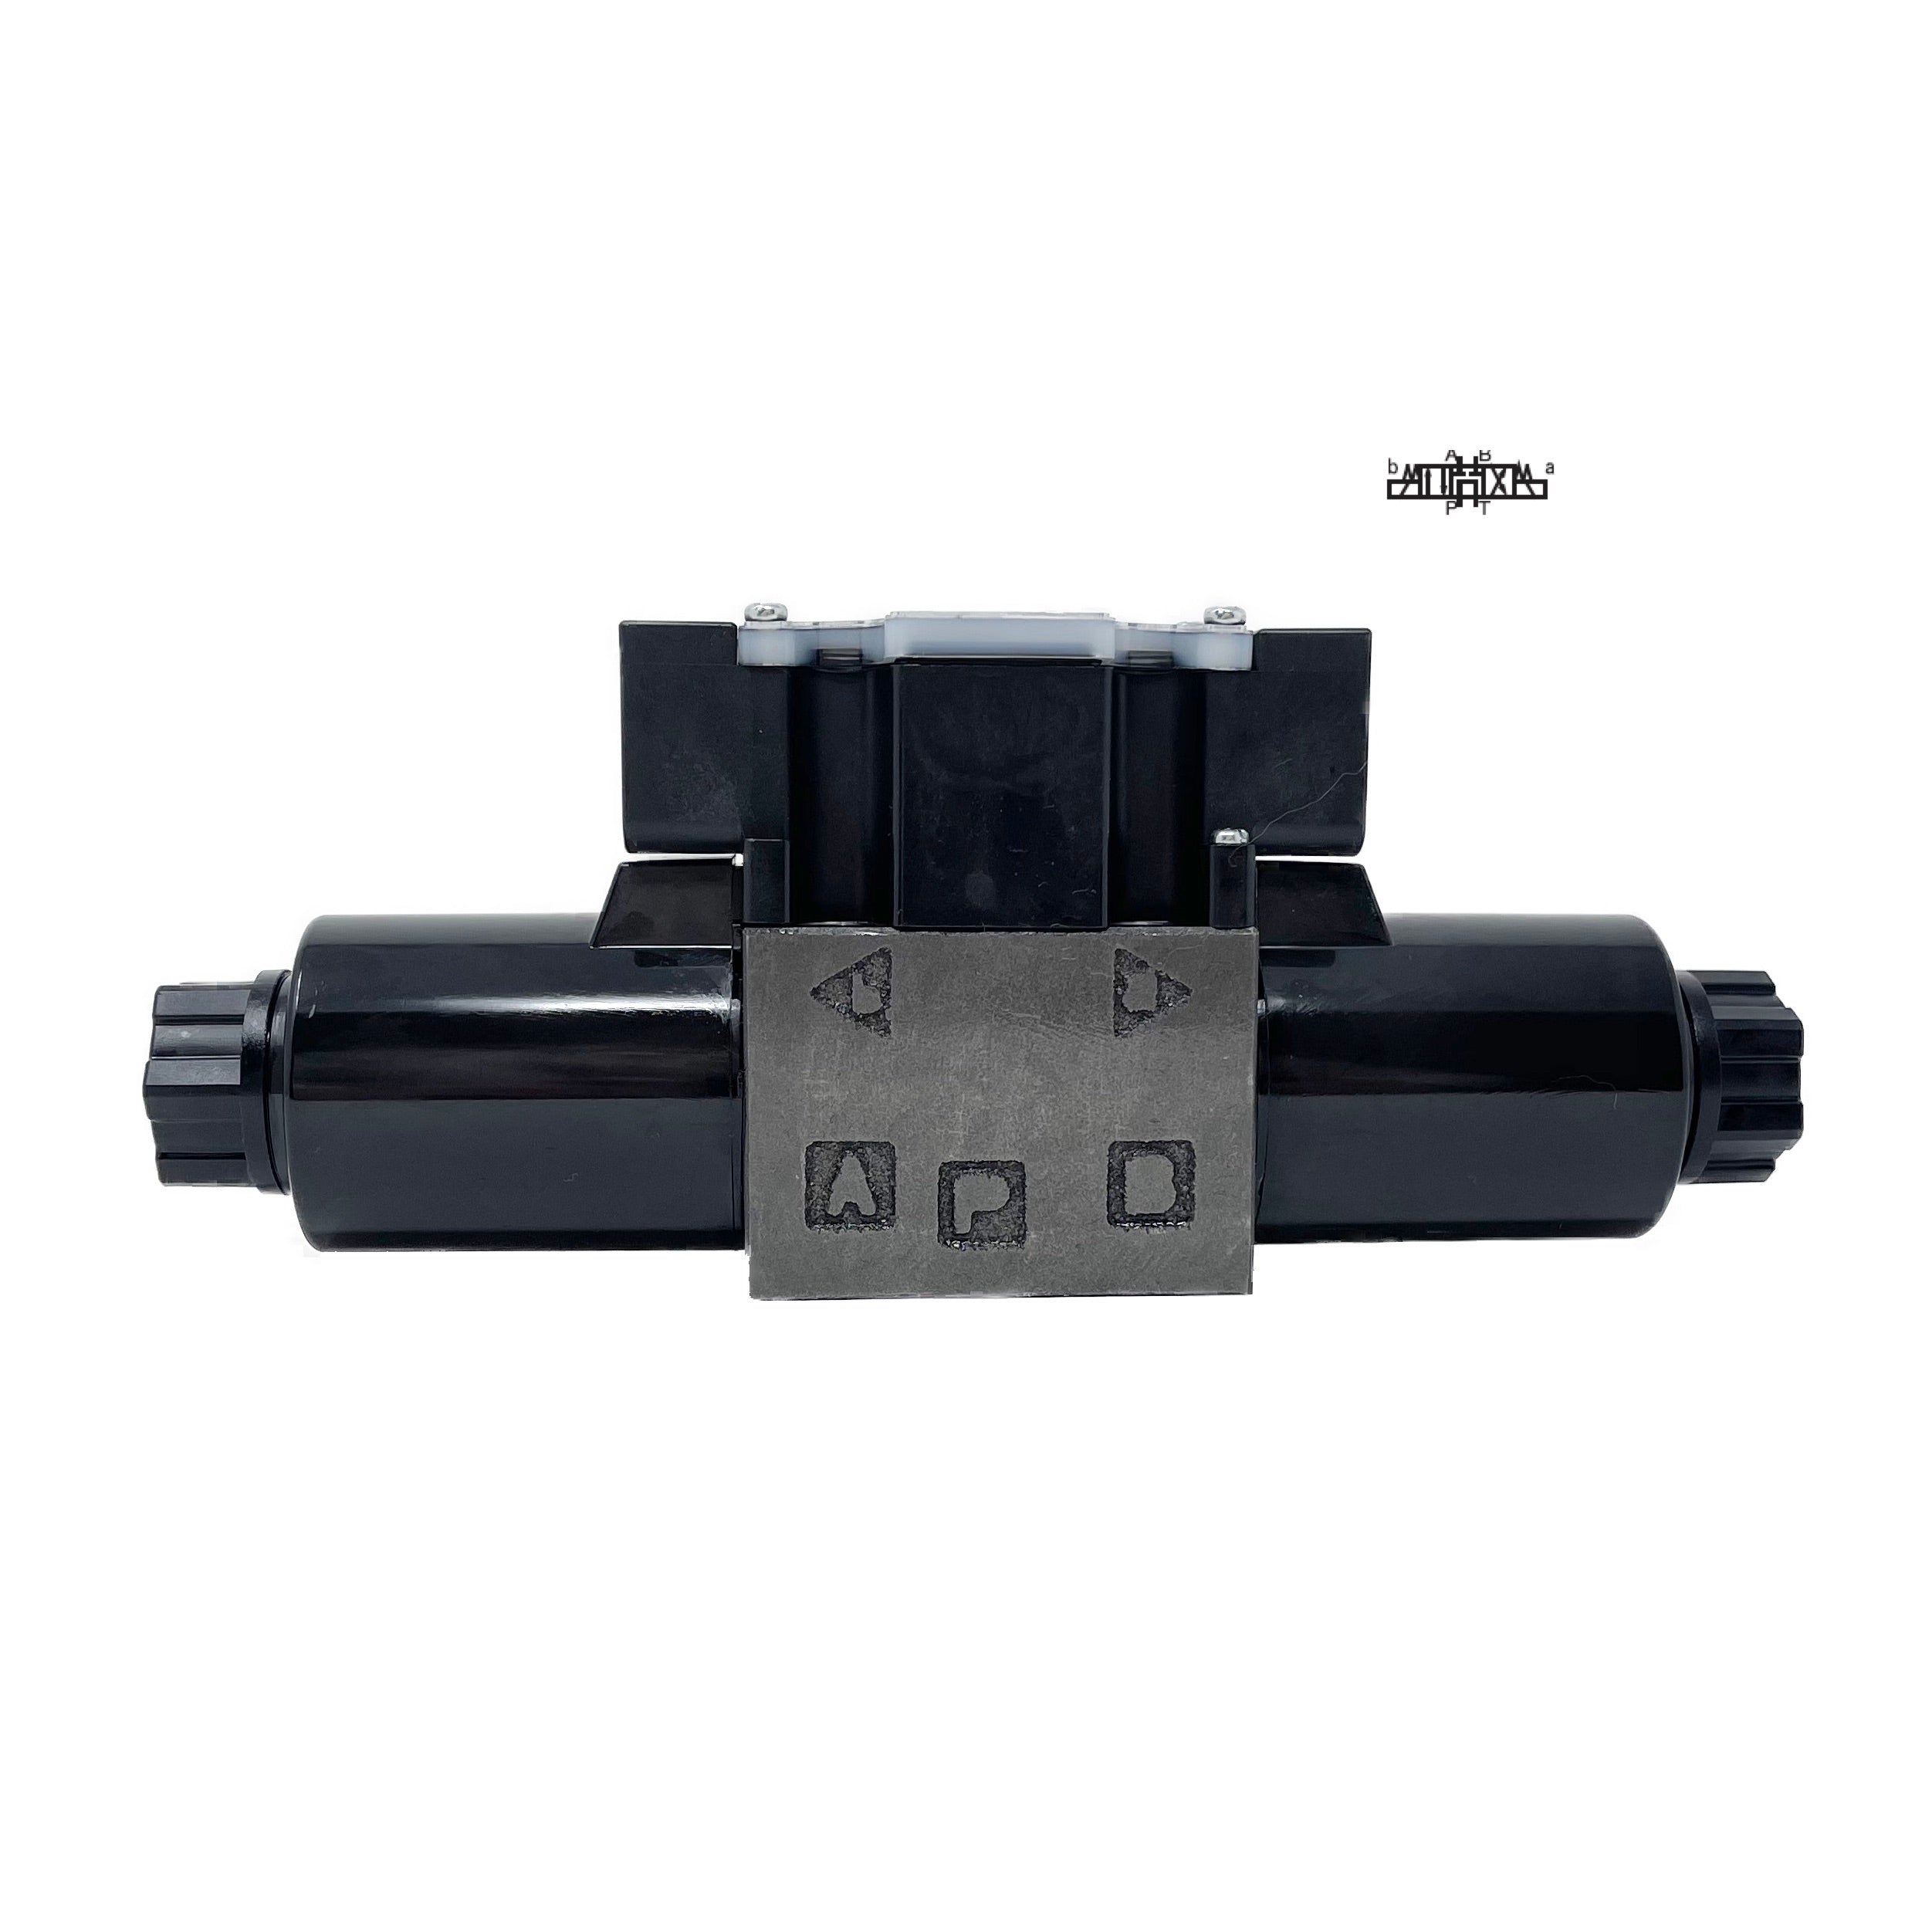 SS-G01-C7Y-FR-D2-E31 : Nachi Solenoid Valve, 3P4W, D03 (NG6), 13.2GPM, 5075psi, P to T with A & B Blocked in Neutral, 24 VDC, Wiring Box with Lights, Shockless Type